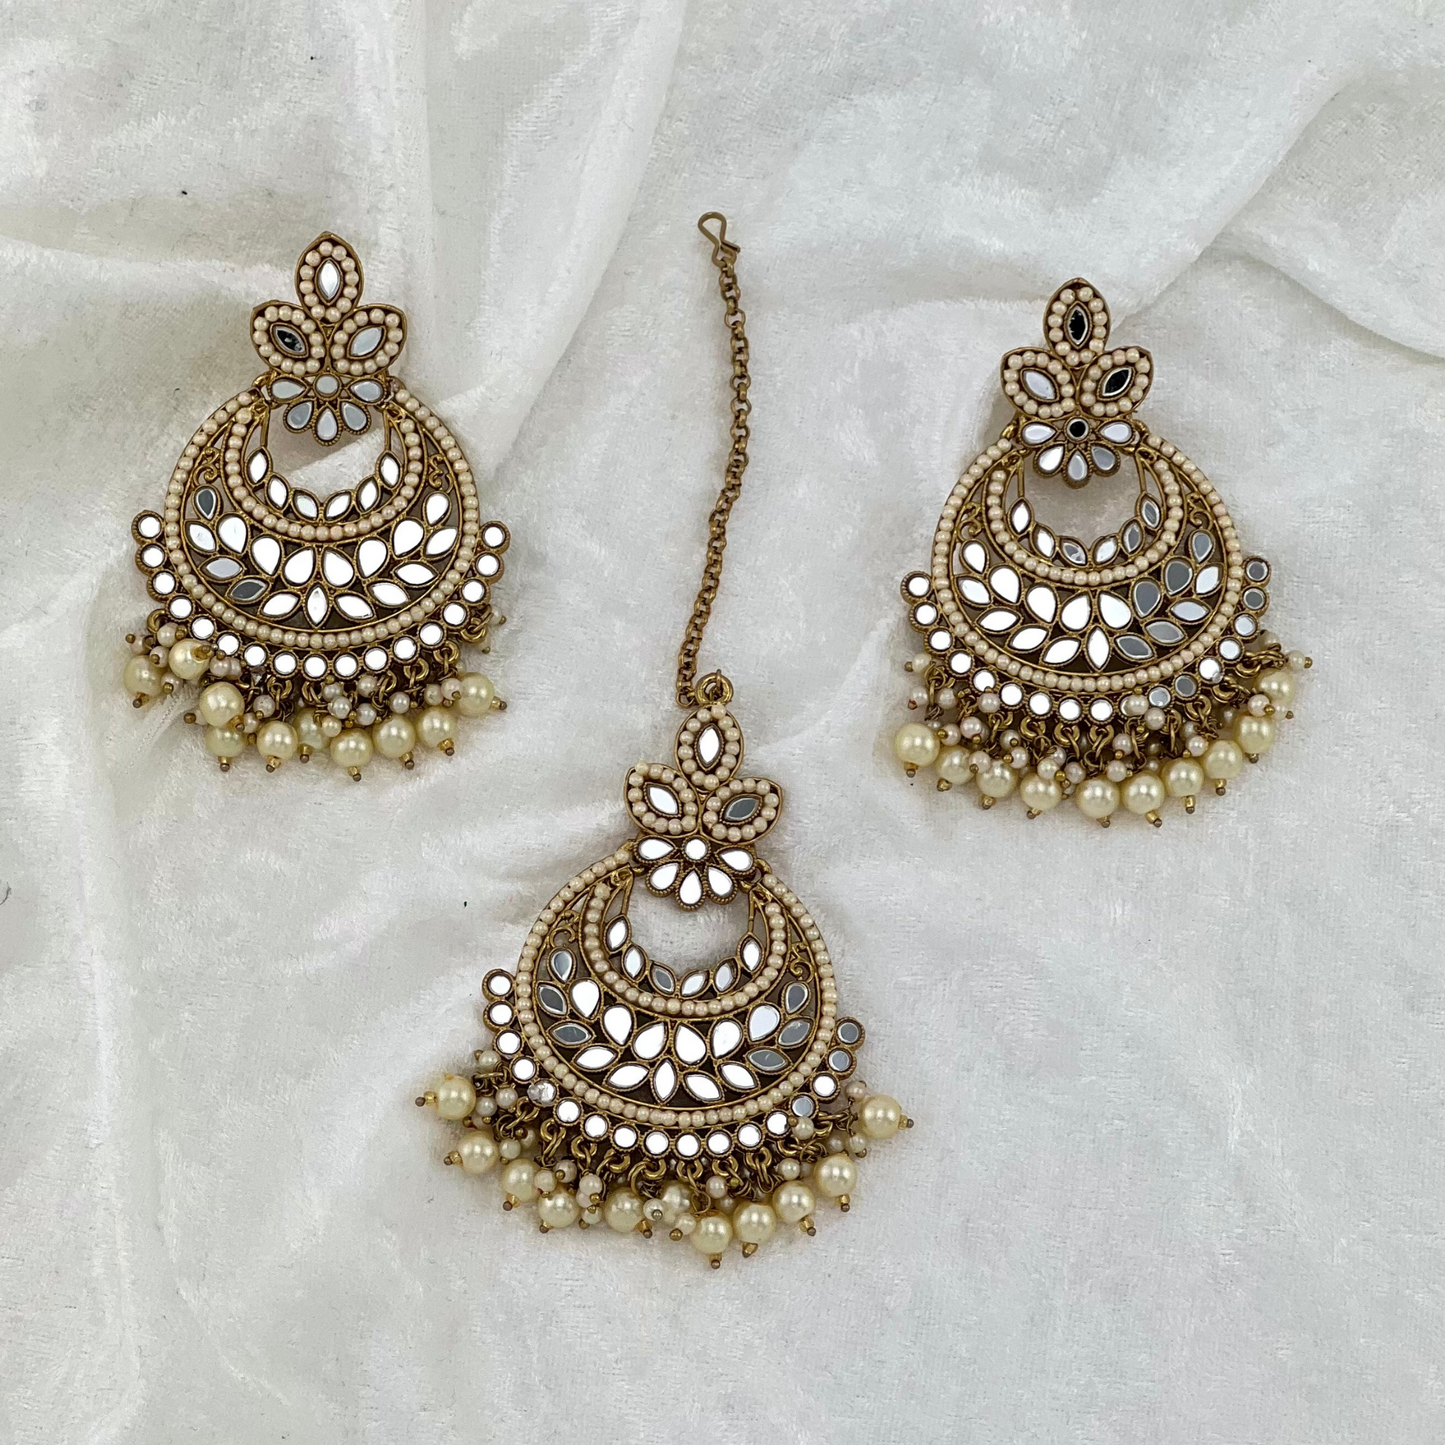 Mirror Tikka Set in Pearl, high quality beads, mirrors and pearls